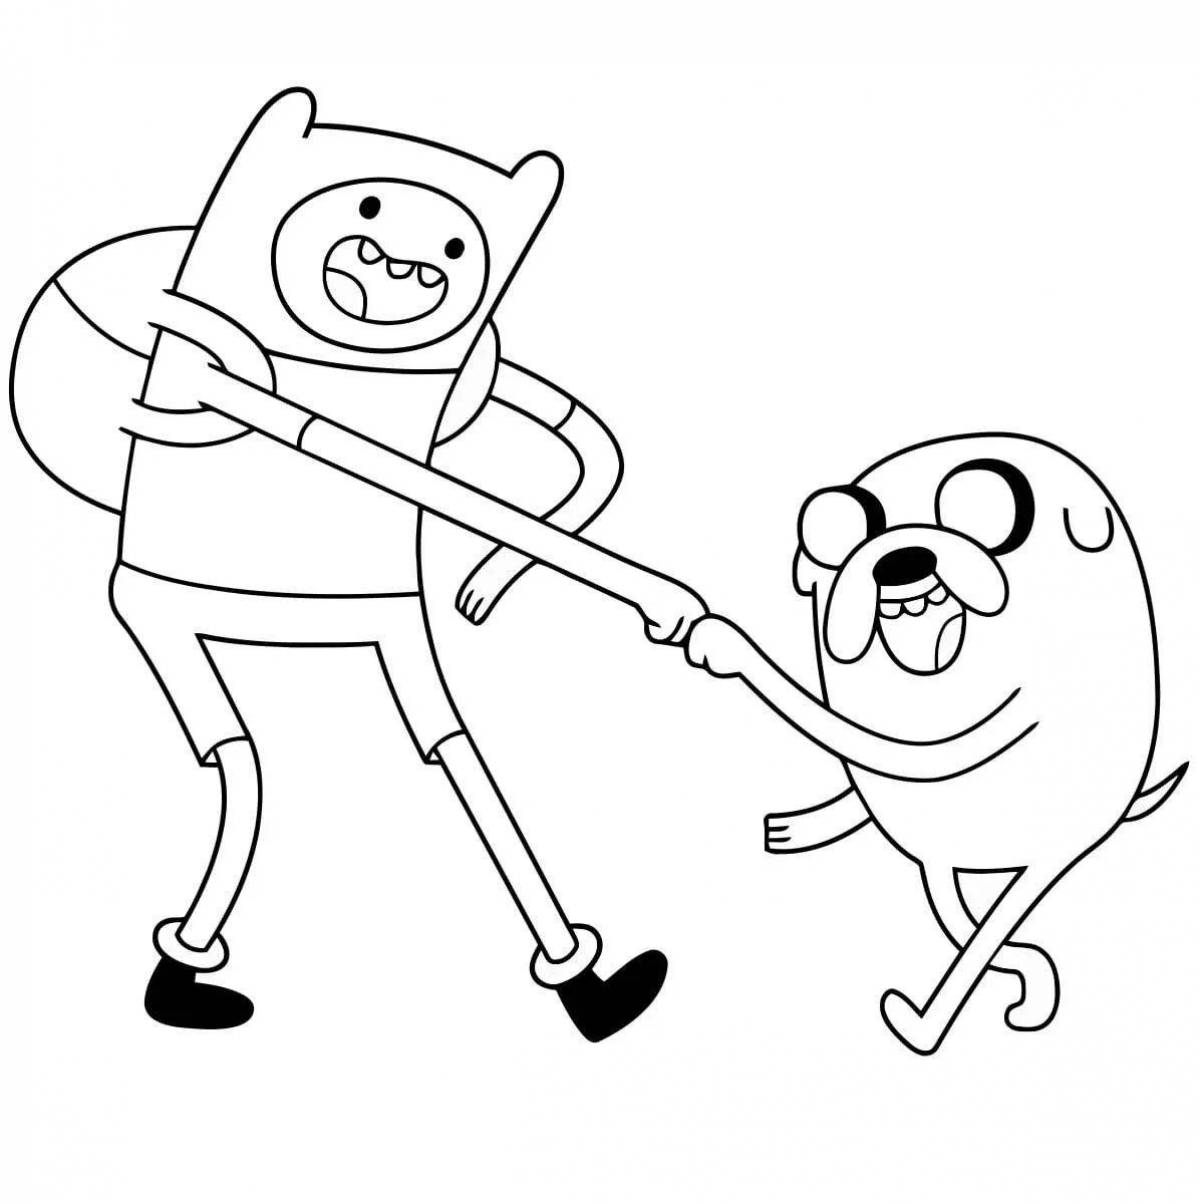 Fin and Jake's colorful adventure time